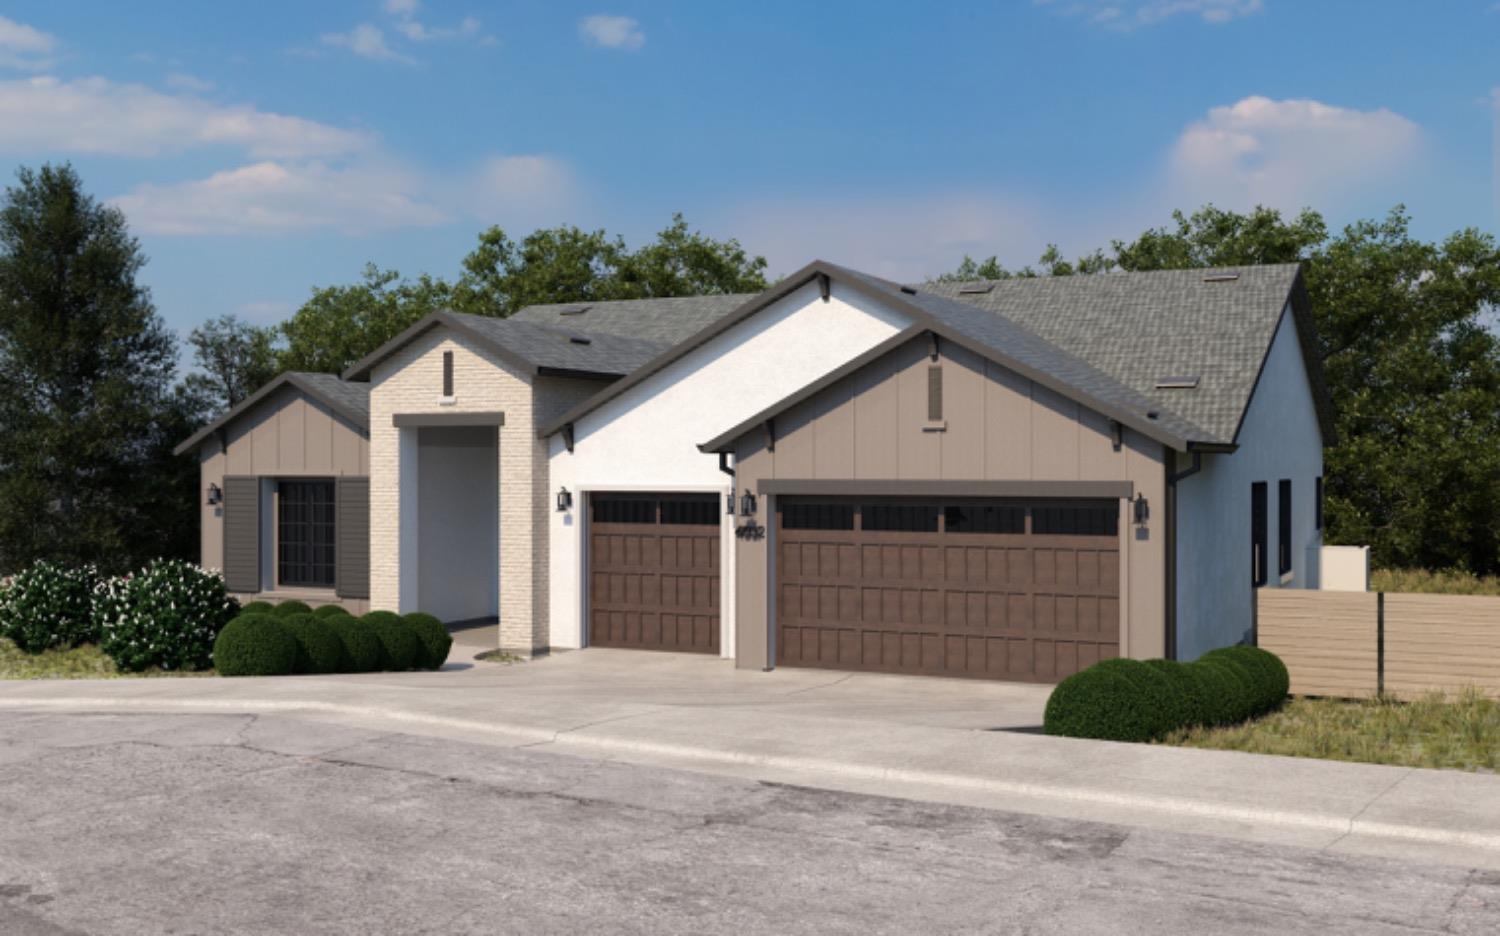 New Construction, Single Story, 2,726 SQFt 4-Bedroom & 3-Bathroom, 3 Car Garage, 10,890 SQFt. Great room concept, with trendy finishes. Completion to be mid May 2024.